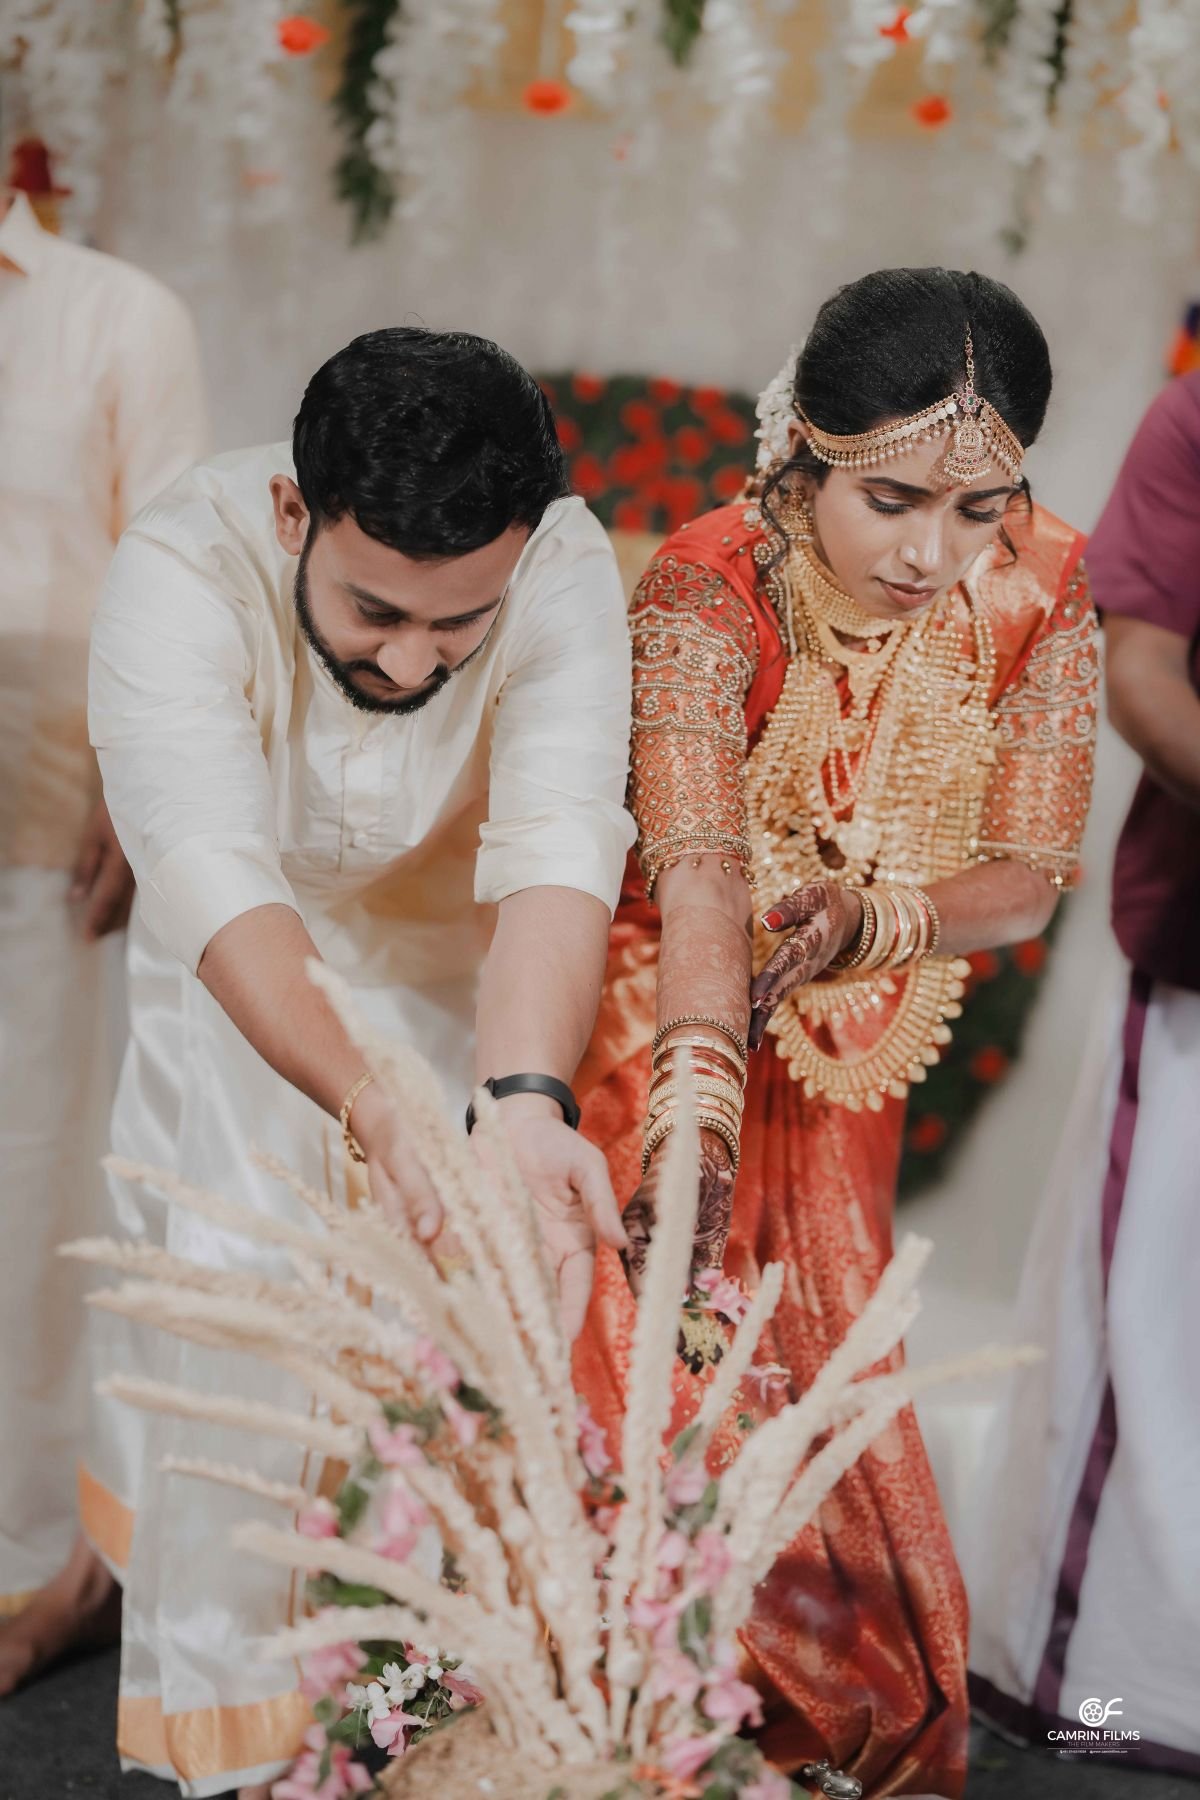 Embrace The Essence Of Hindu Customs In A Blissful Wedding Affair.